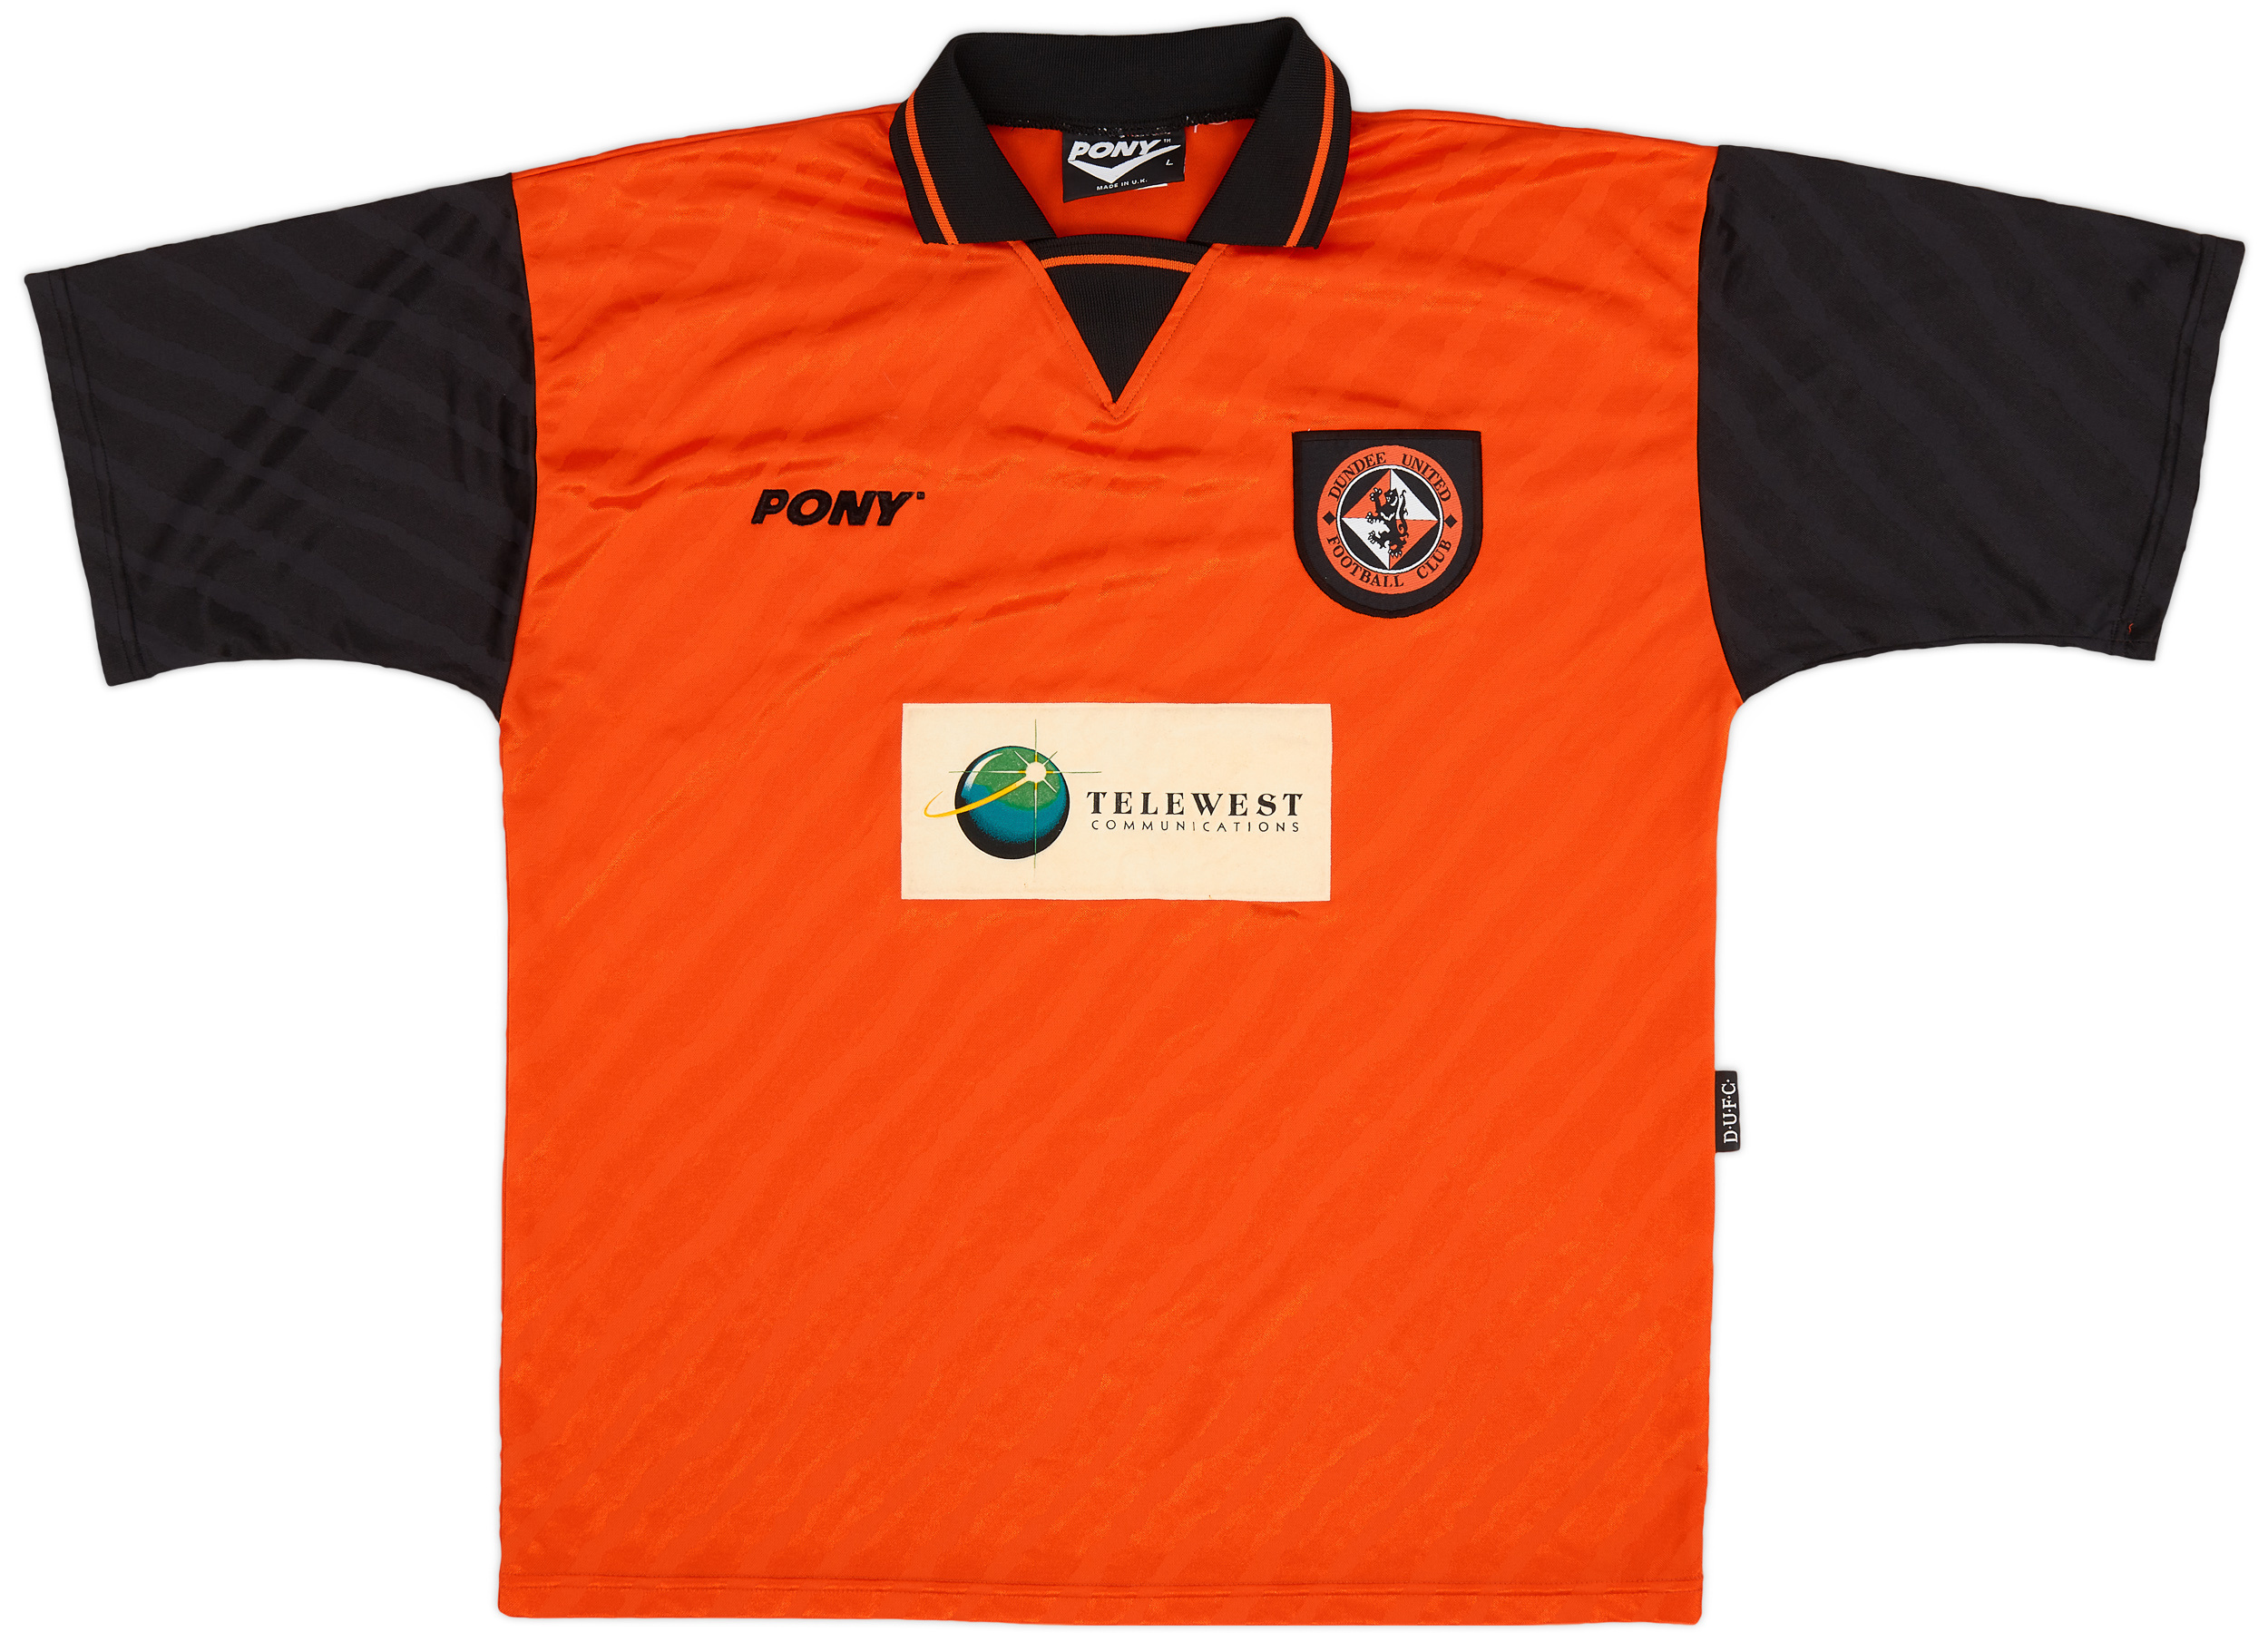 1996-97 Dundee United Home Shirt - 8/10 - ()